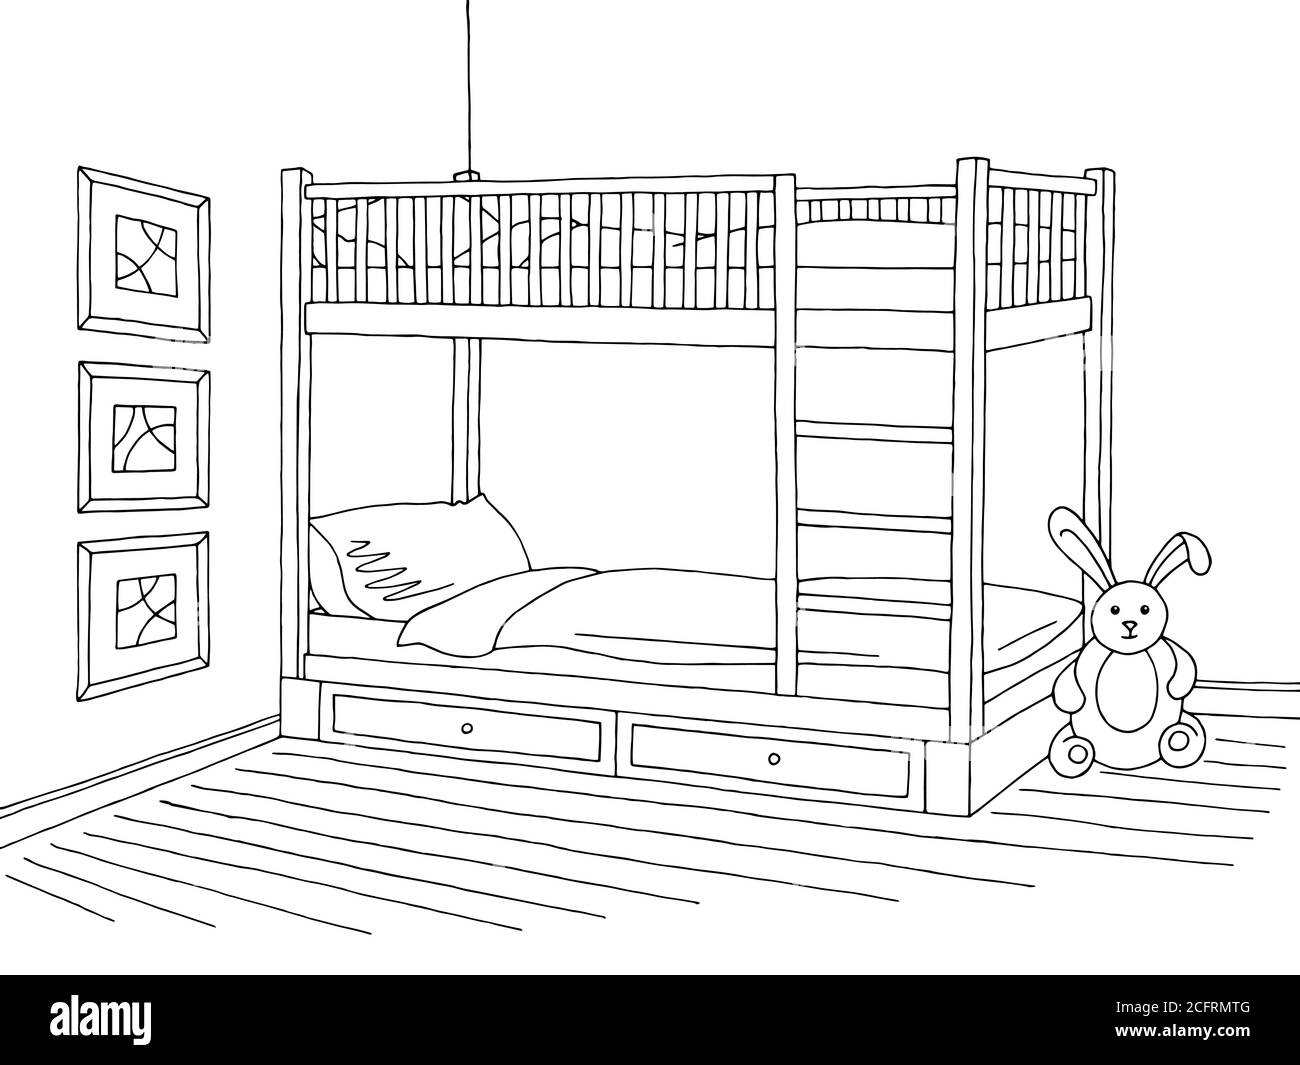 bunk bed coloring page